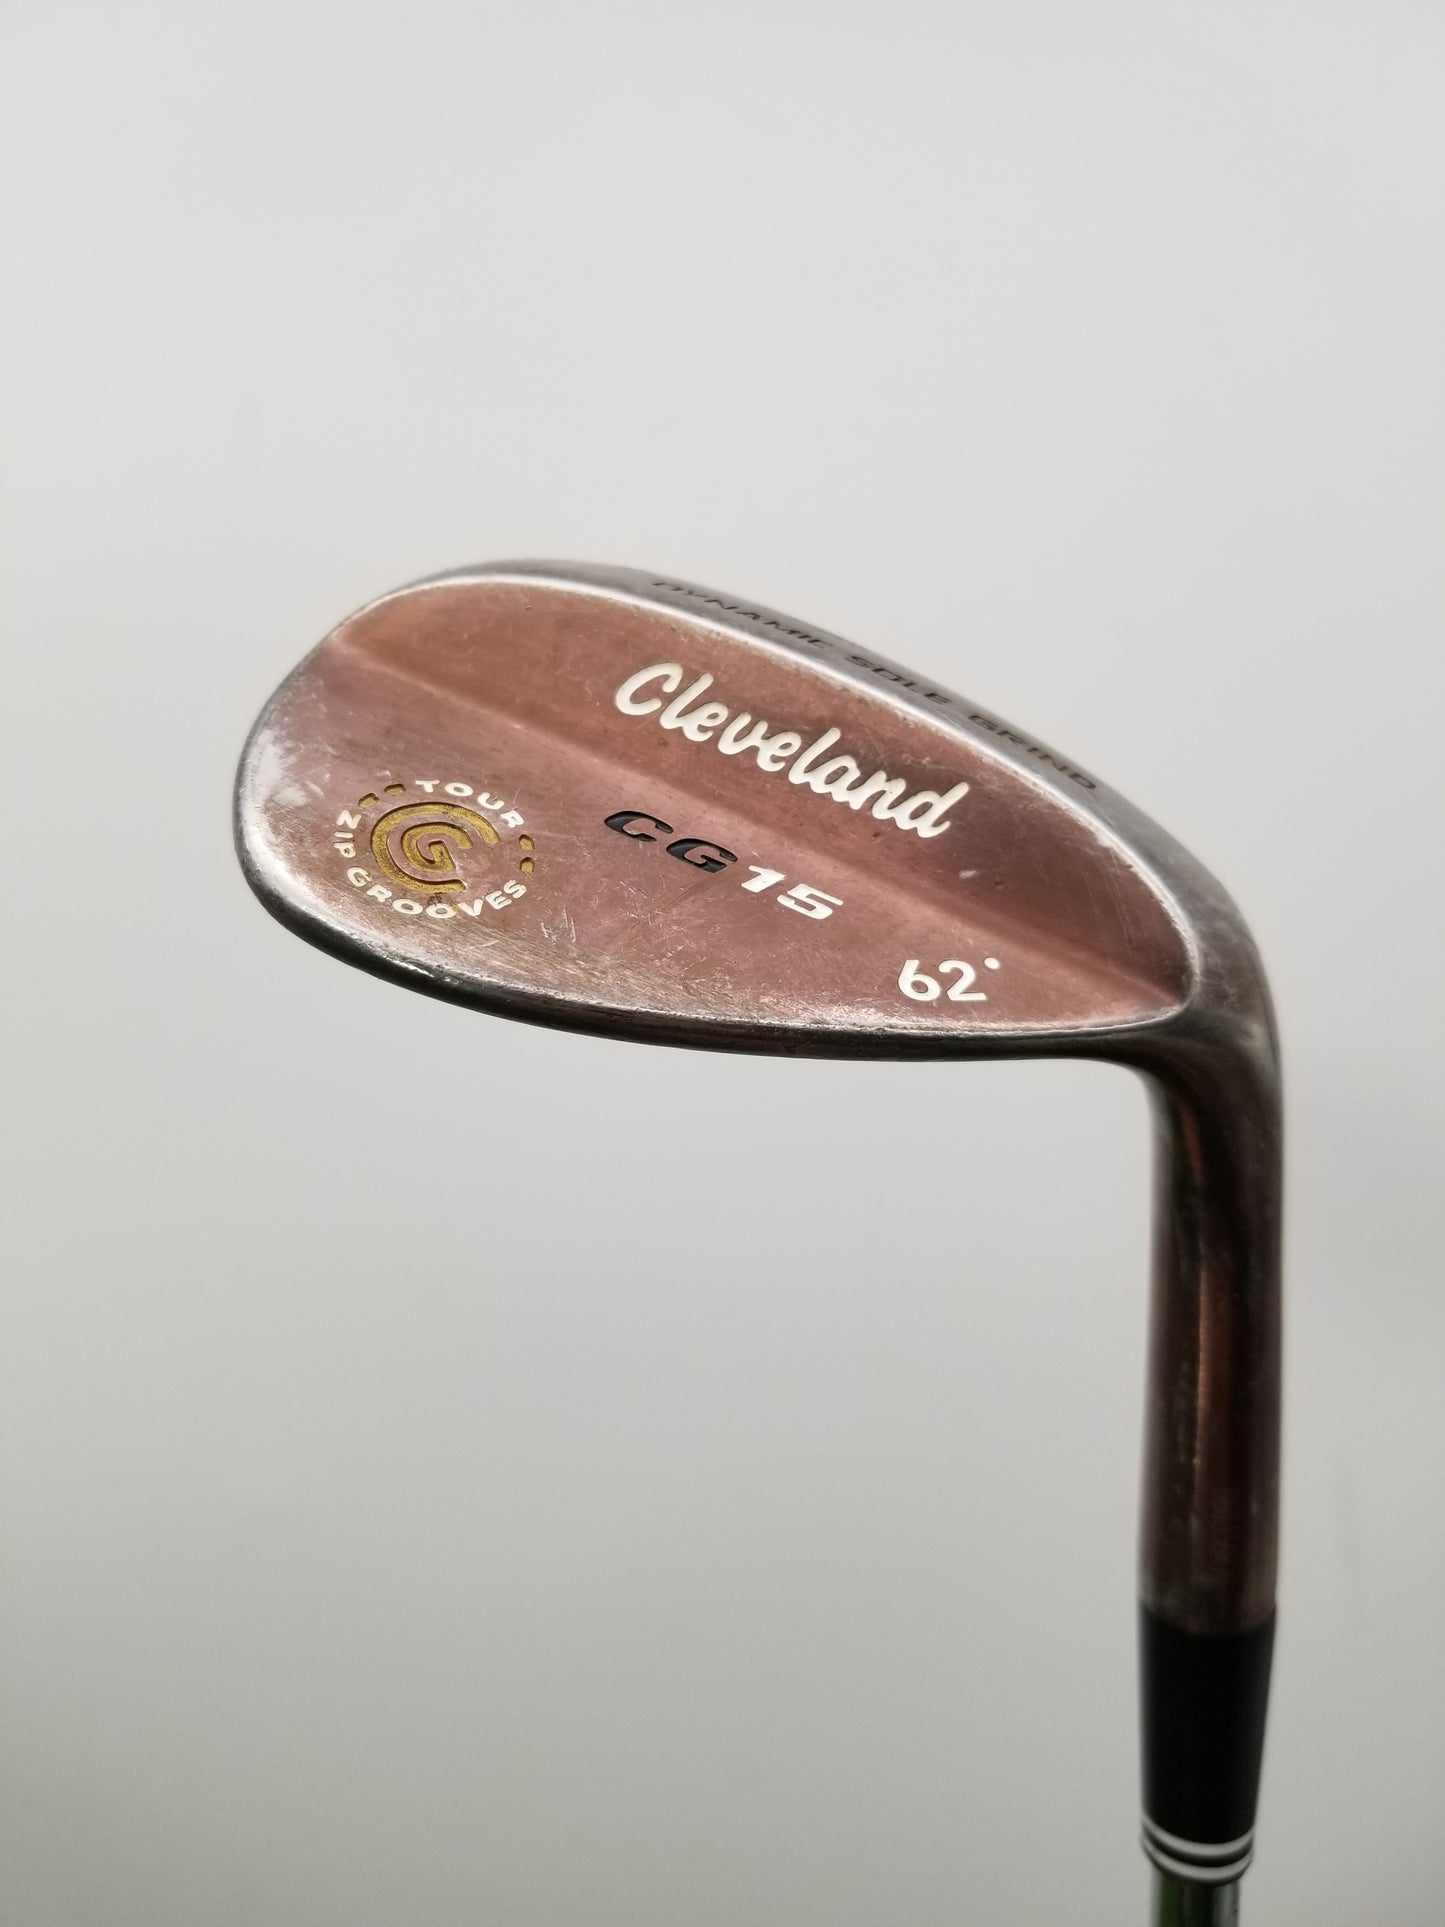 2010 CLEVELAND CG15 DSG OIL CAN WEDGE 62* WEDGE FLEX TRACTION 35.5" GOOD